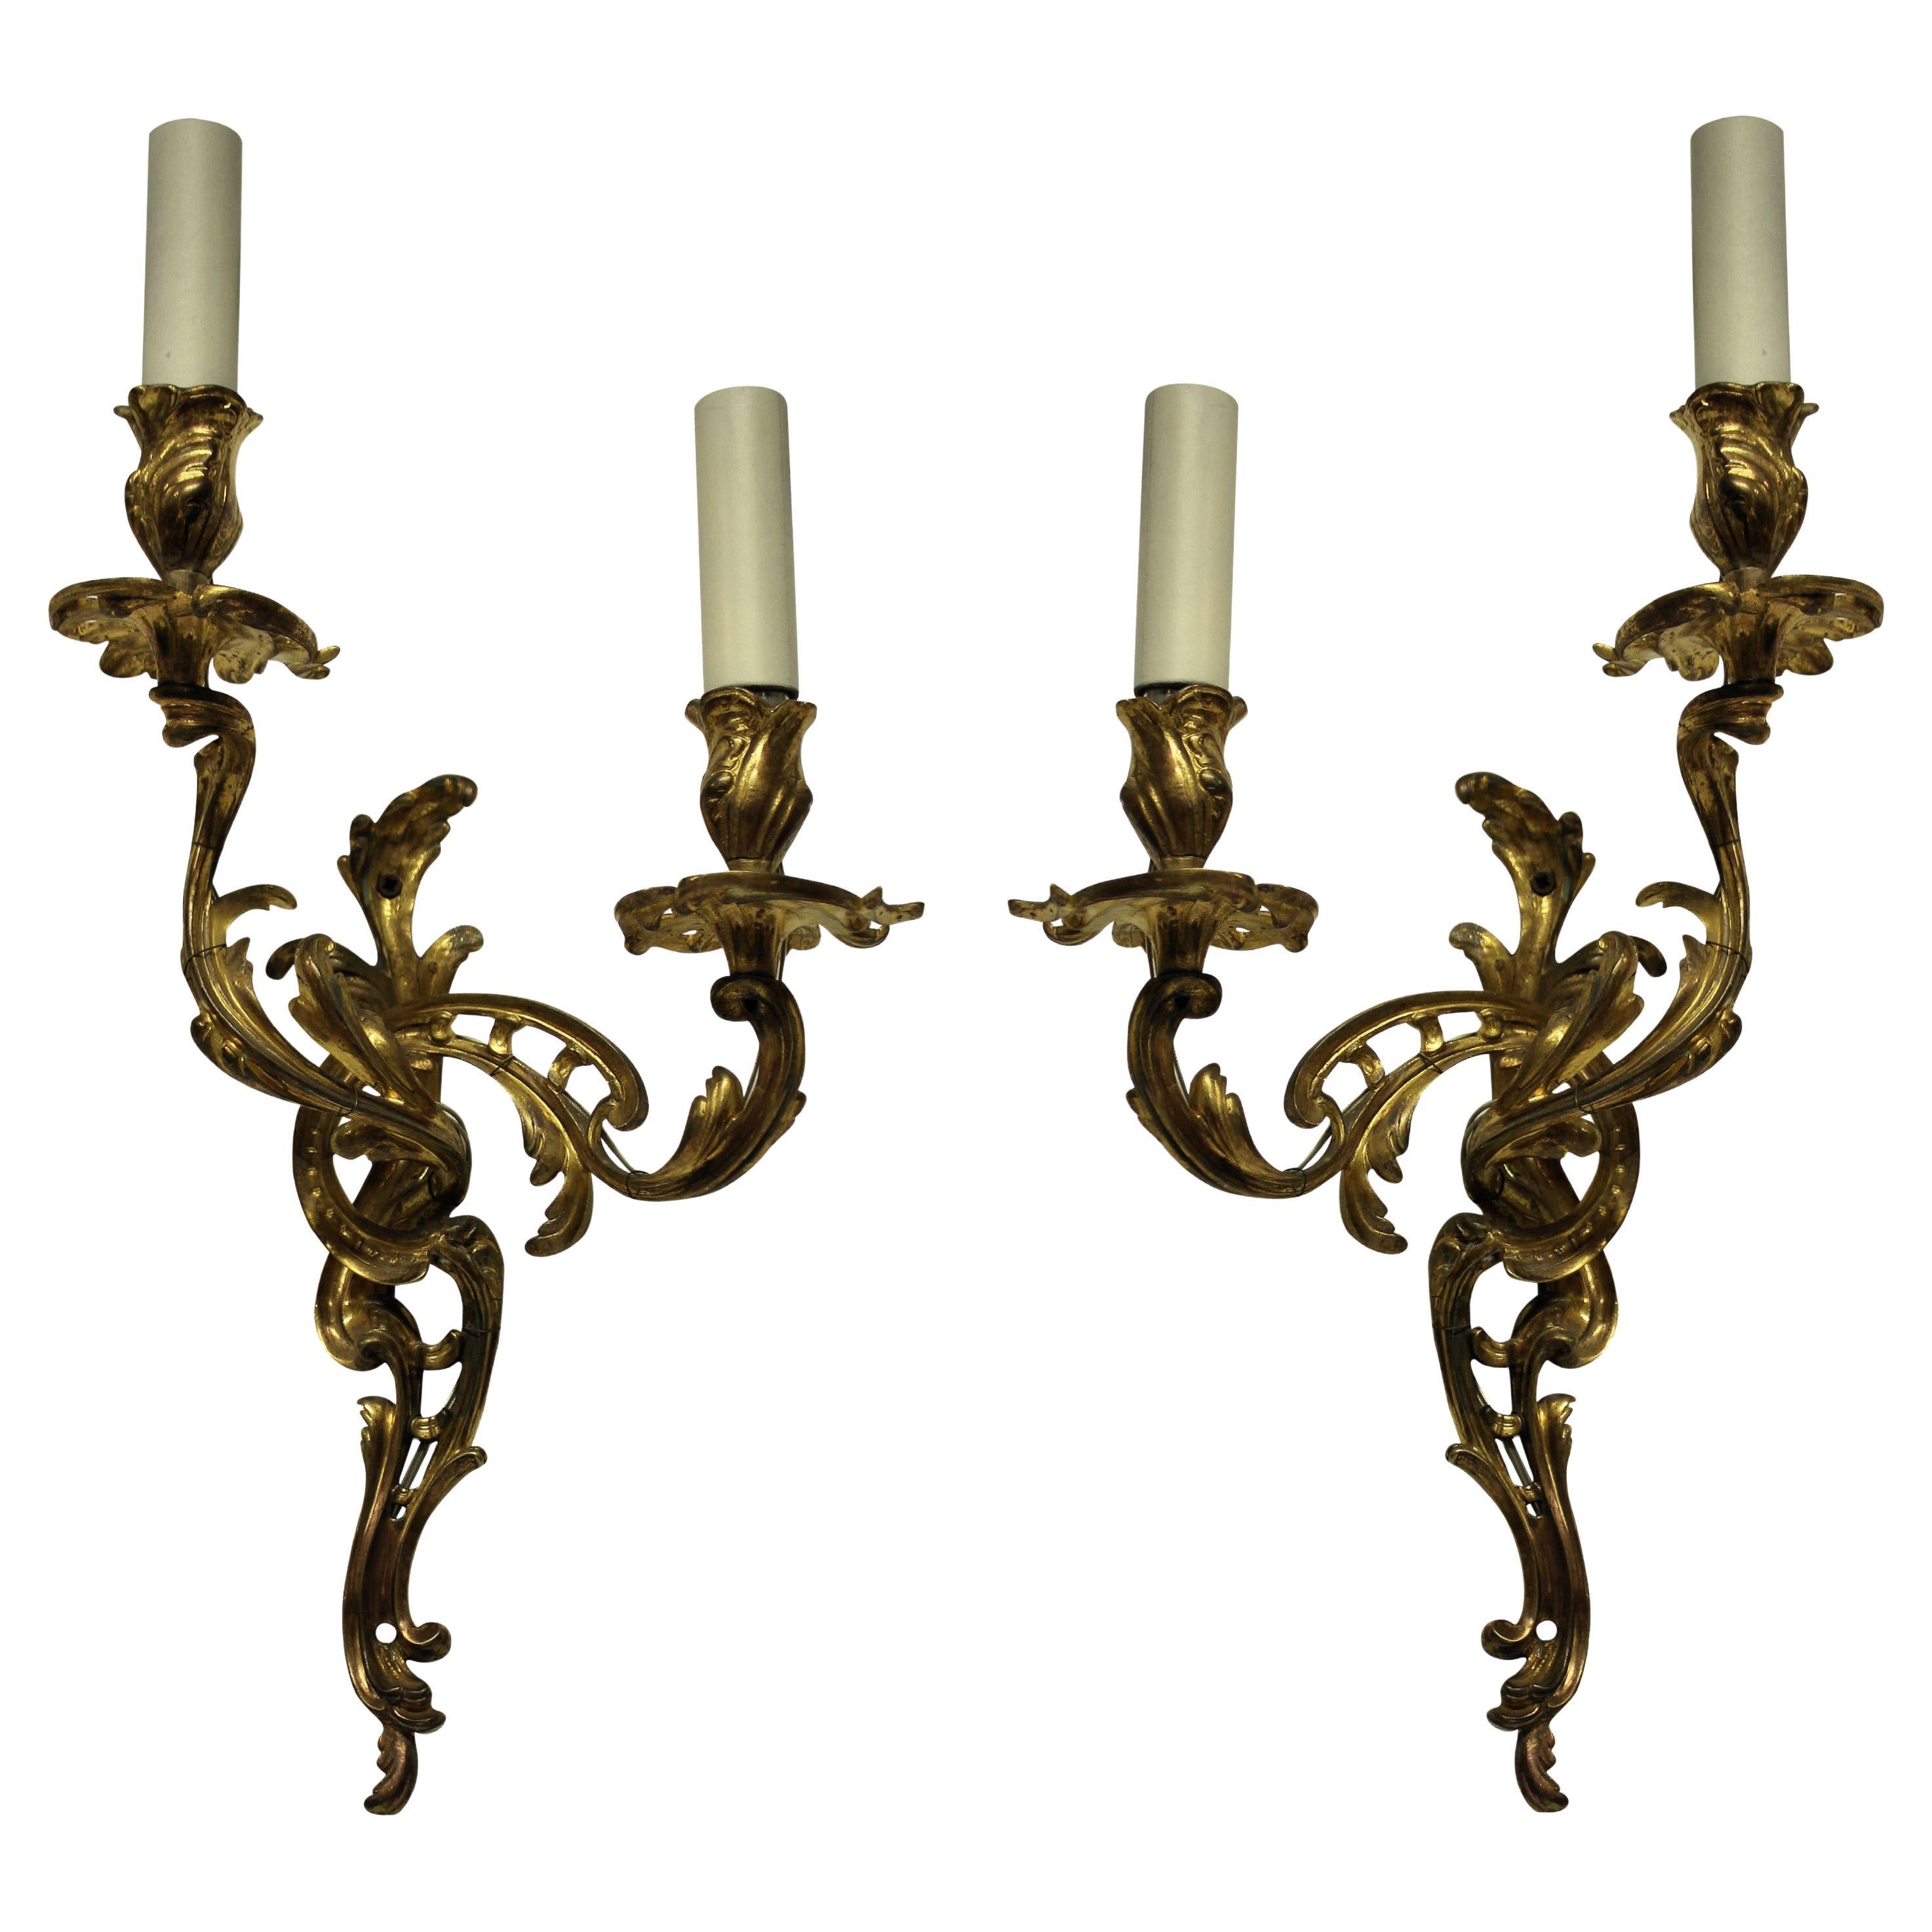 Pair of Louis XV Style Wall Sconces